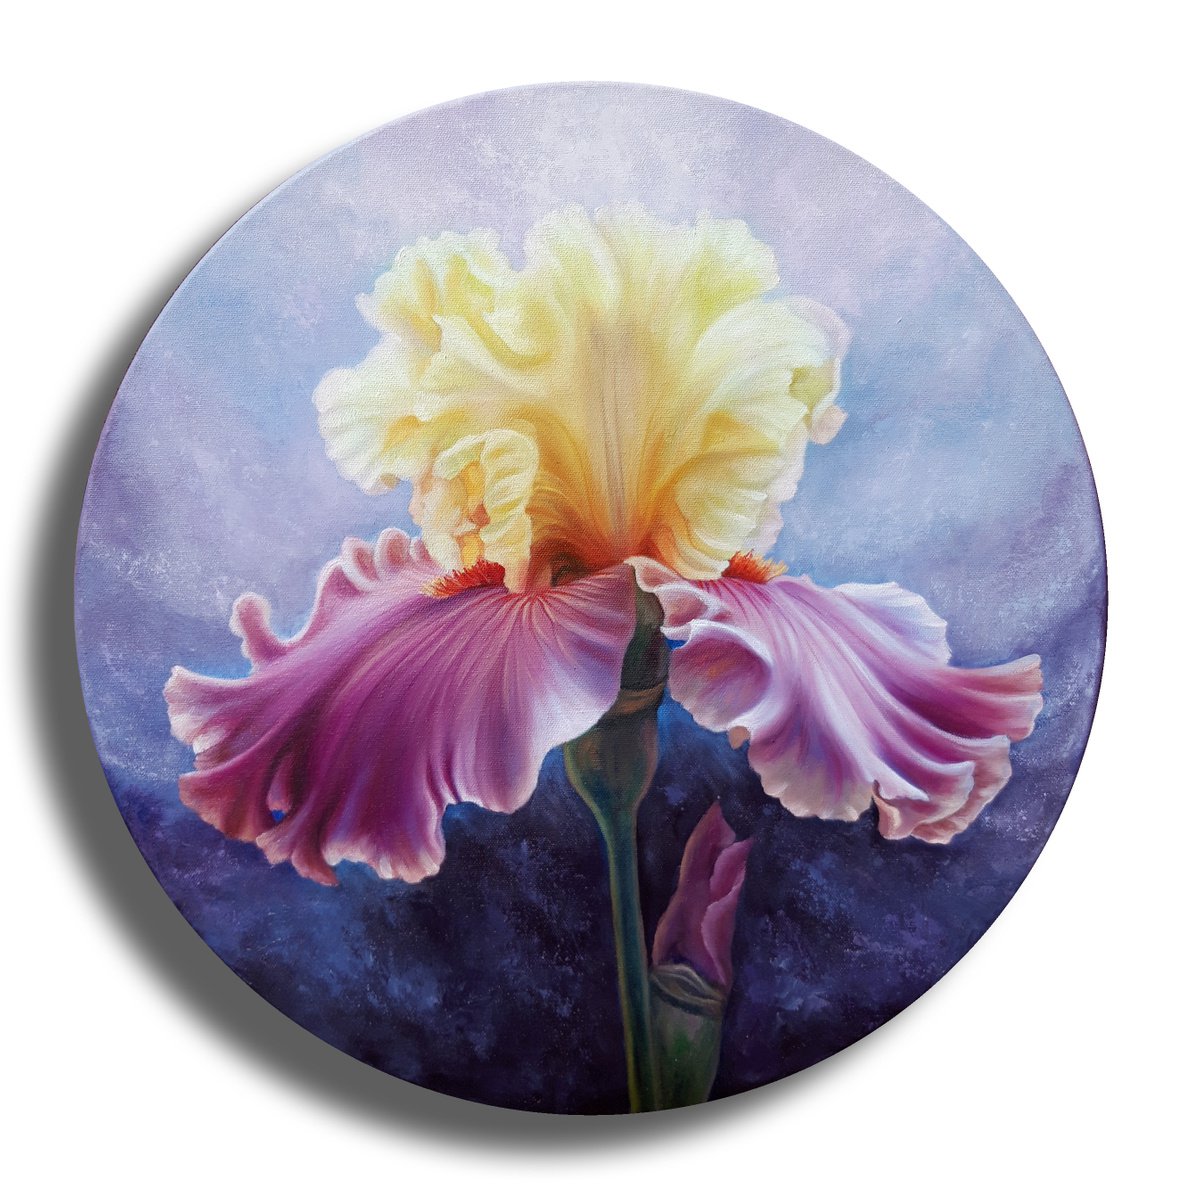 Iris, mixed media round gallery canvas floral painting, flowers art by Anna Steshenko